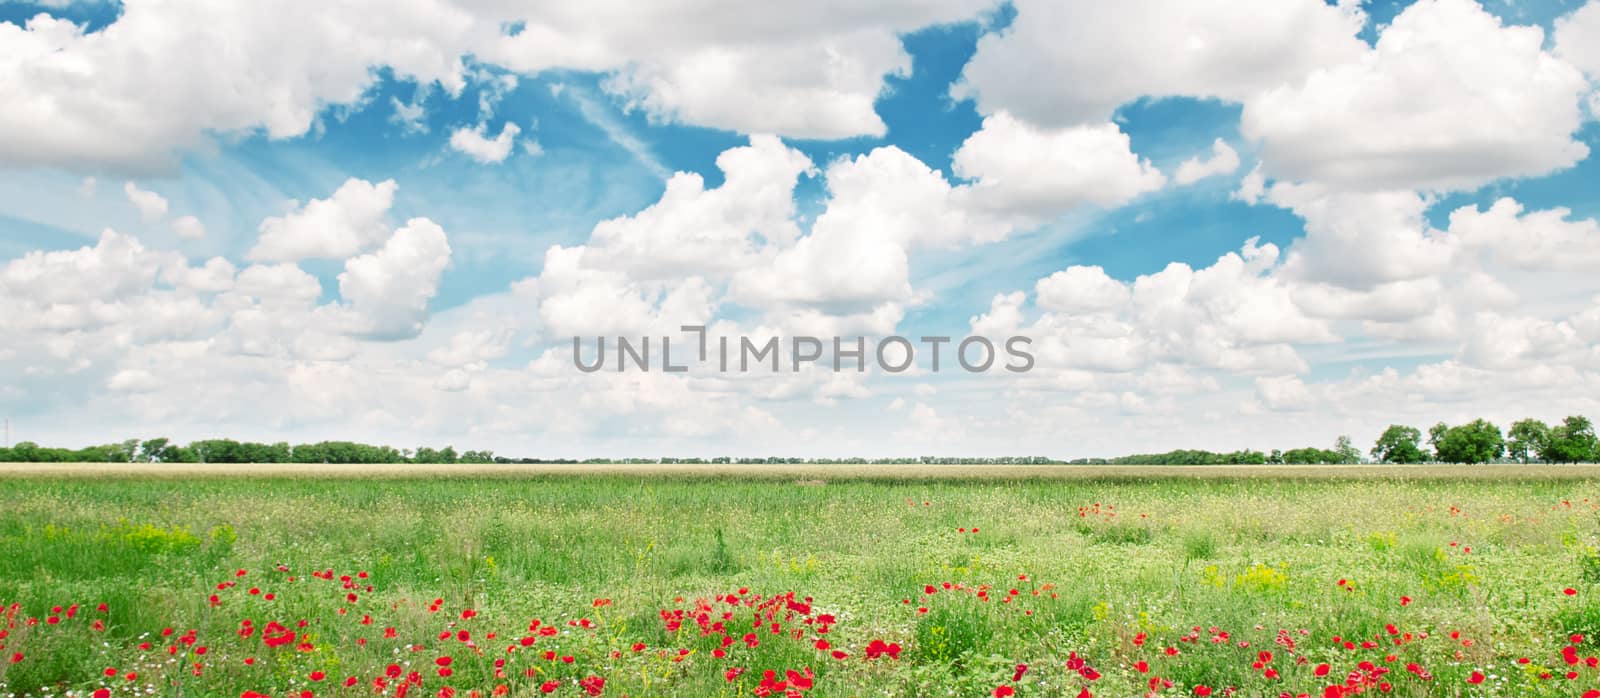 beautiful wheat field and blue cloudy sky by galina_velusceac